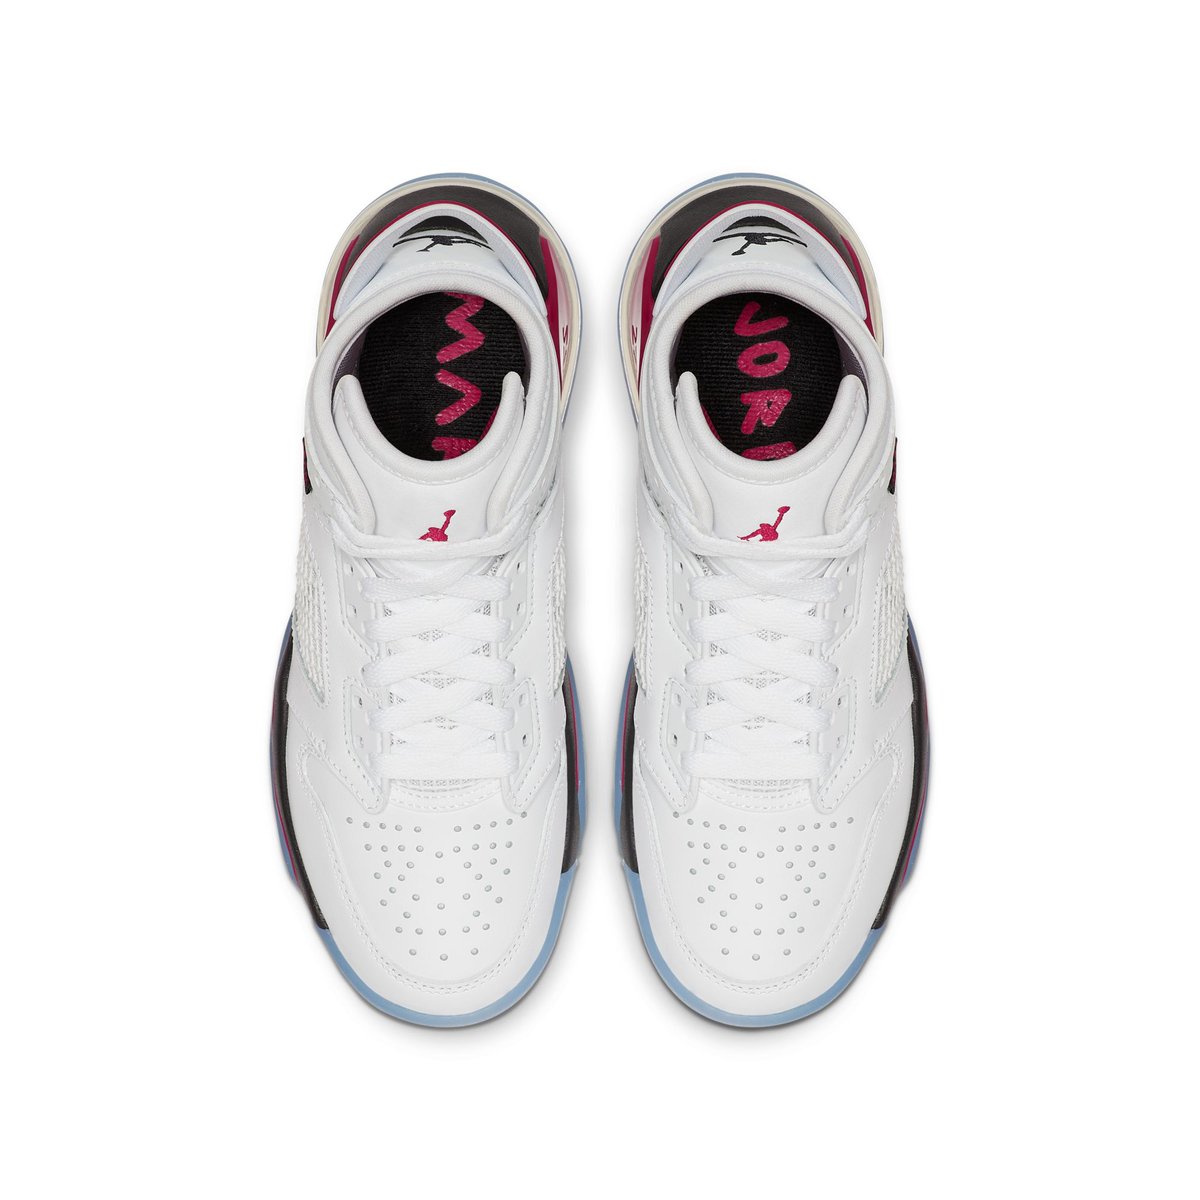 remember Stem workshop A 'White/Black/Red' Colorway Has Been Spotted on the Jordan Mars 270